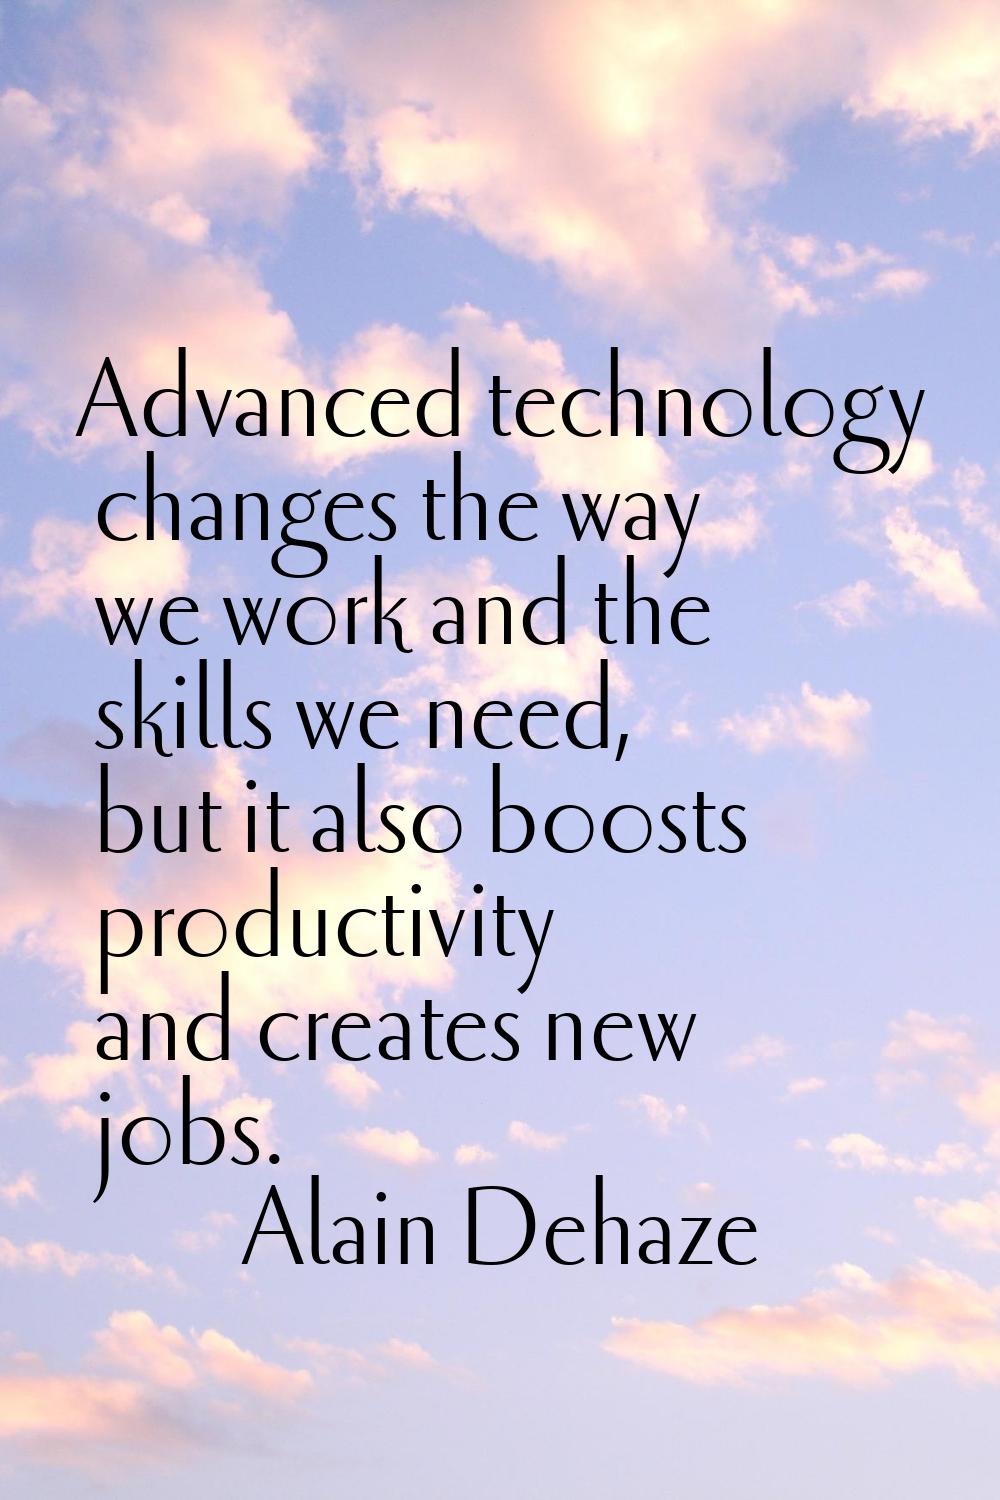 Advanced technology changes the way we work and the skills we need, but it also boosts productivity